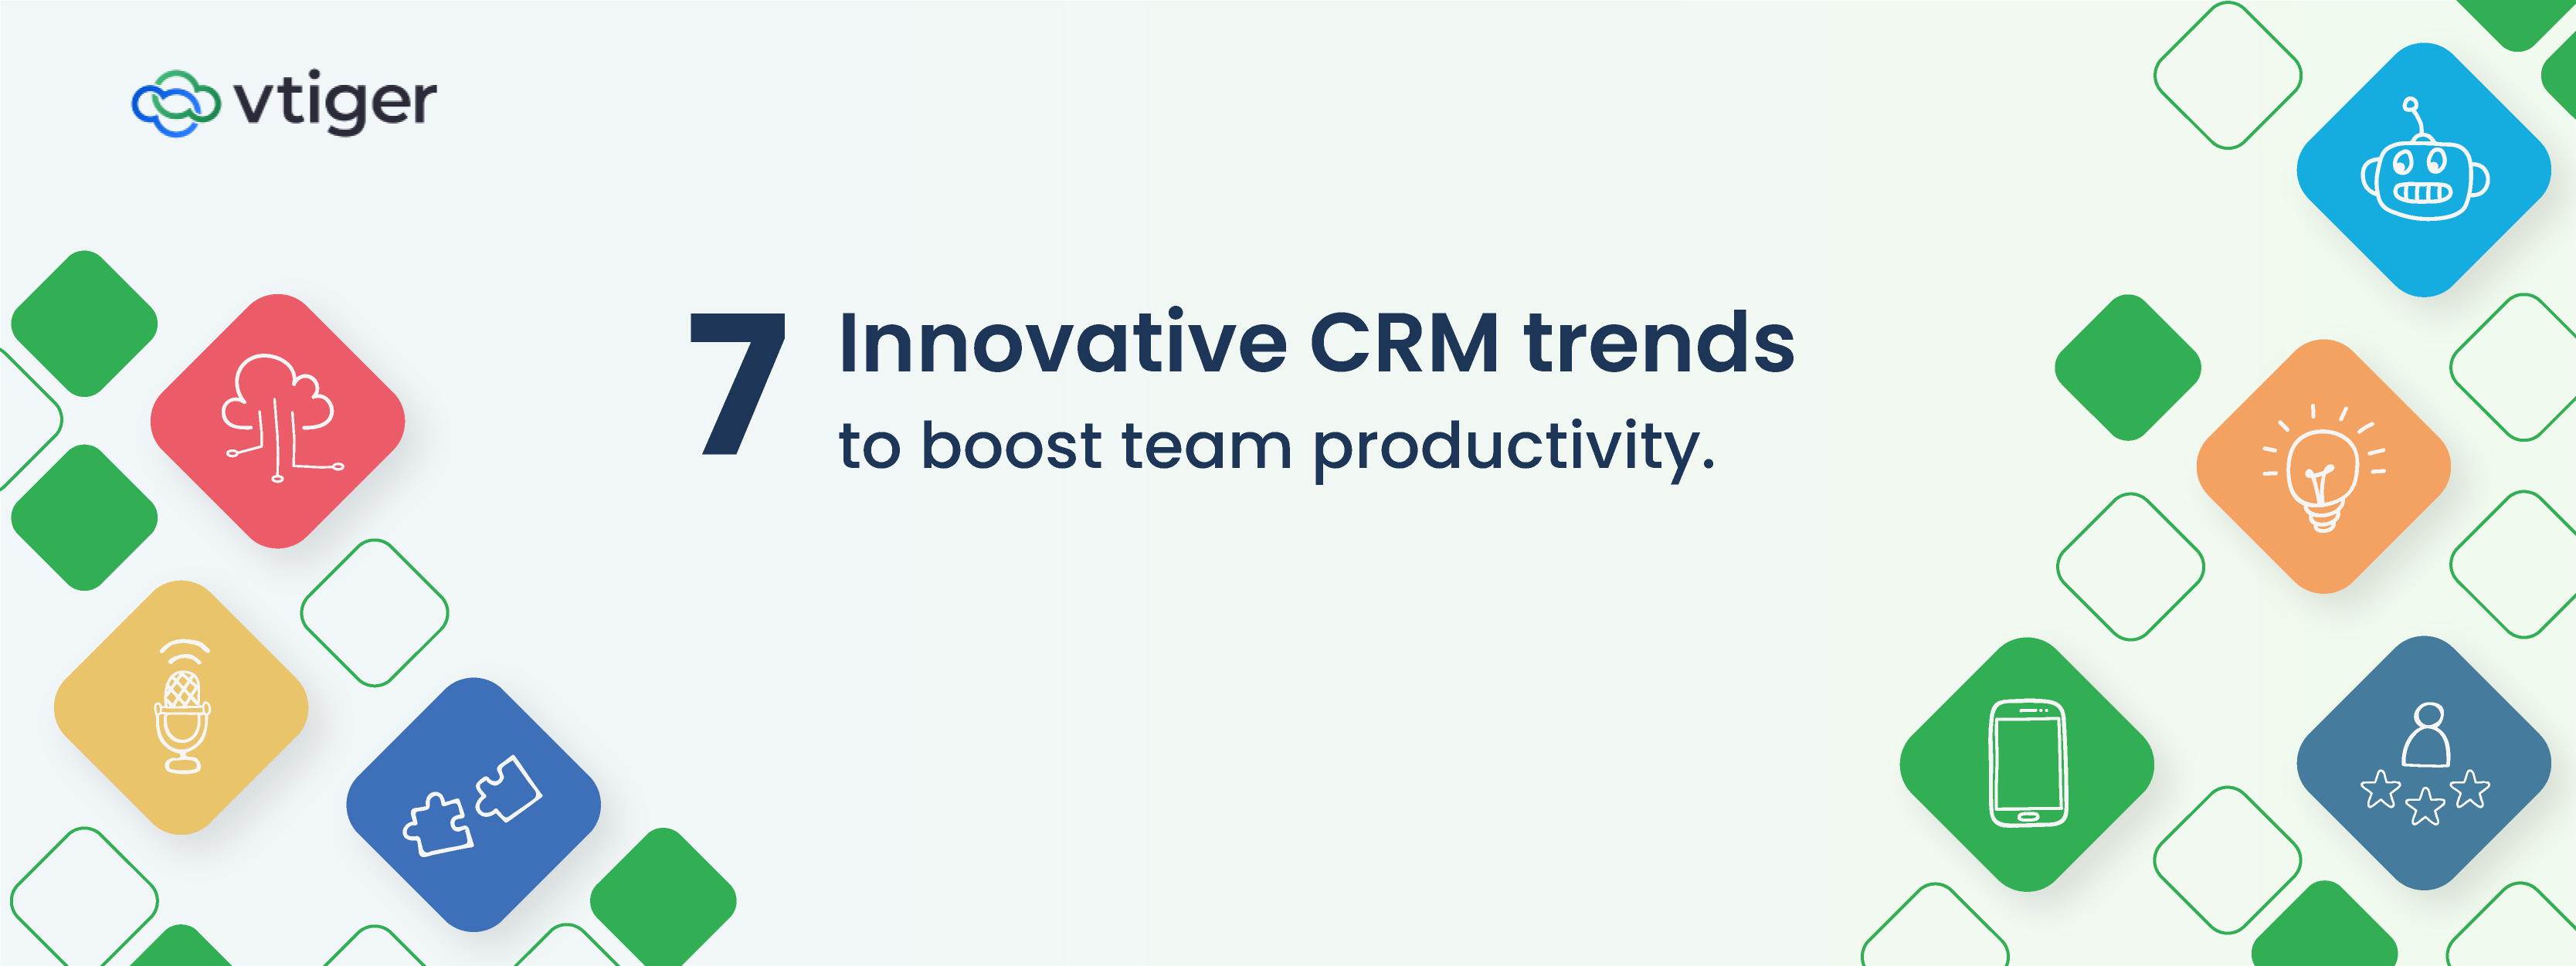 CRM-trends-06